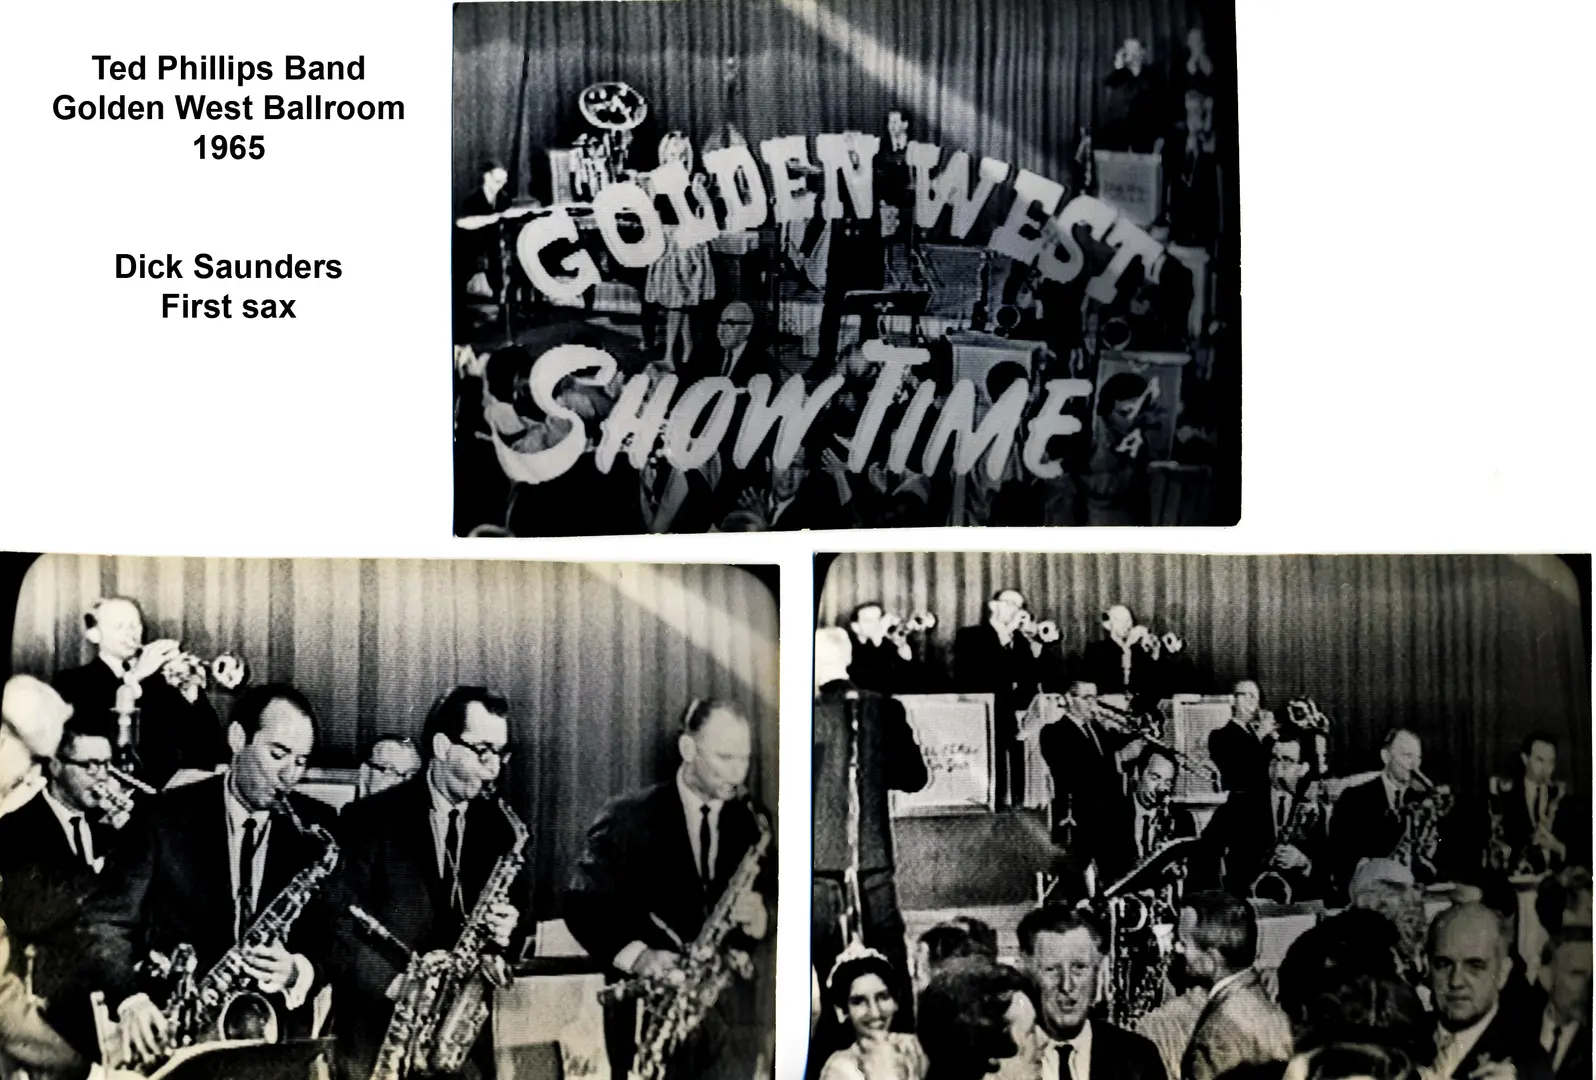 Ted Phillips Band Golden West Ballroom 1965